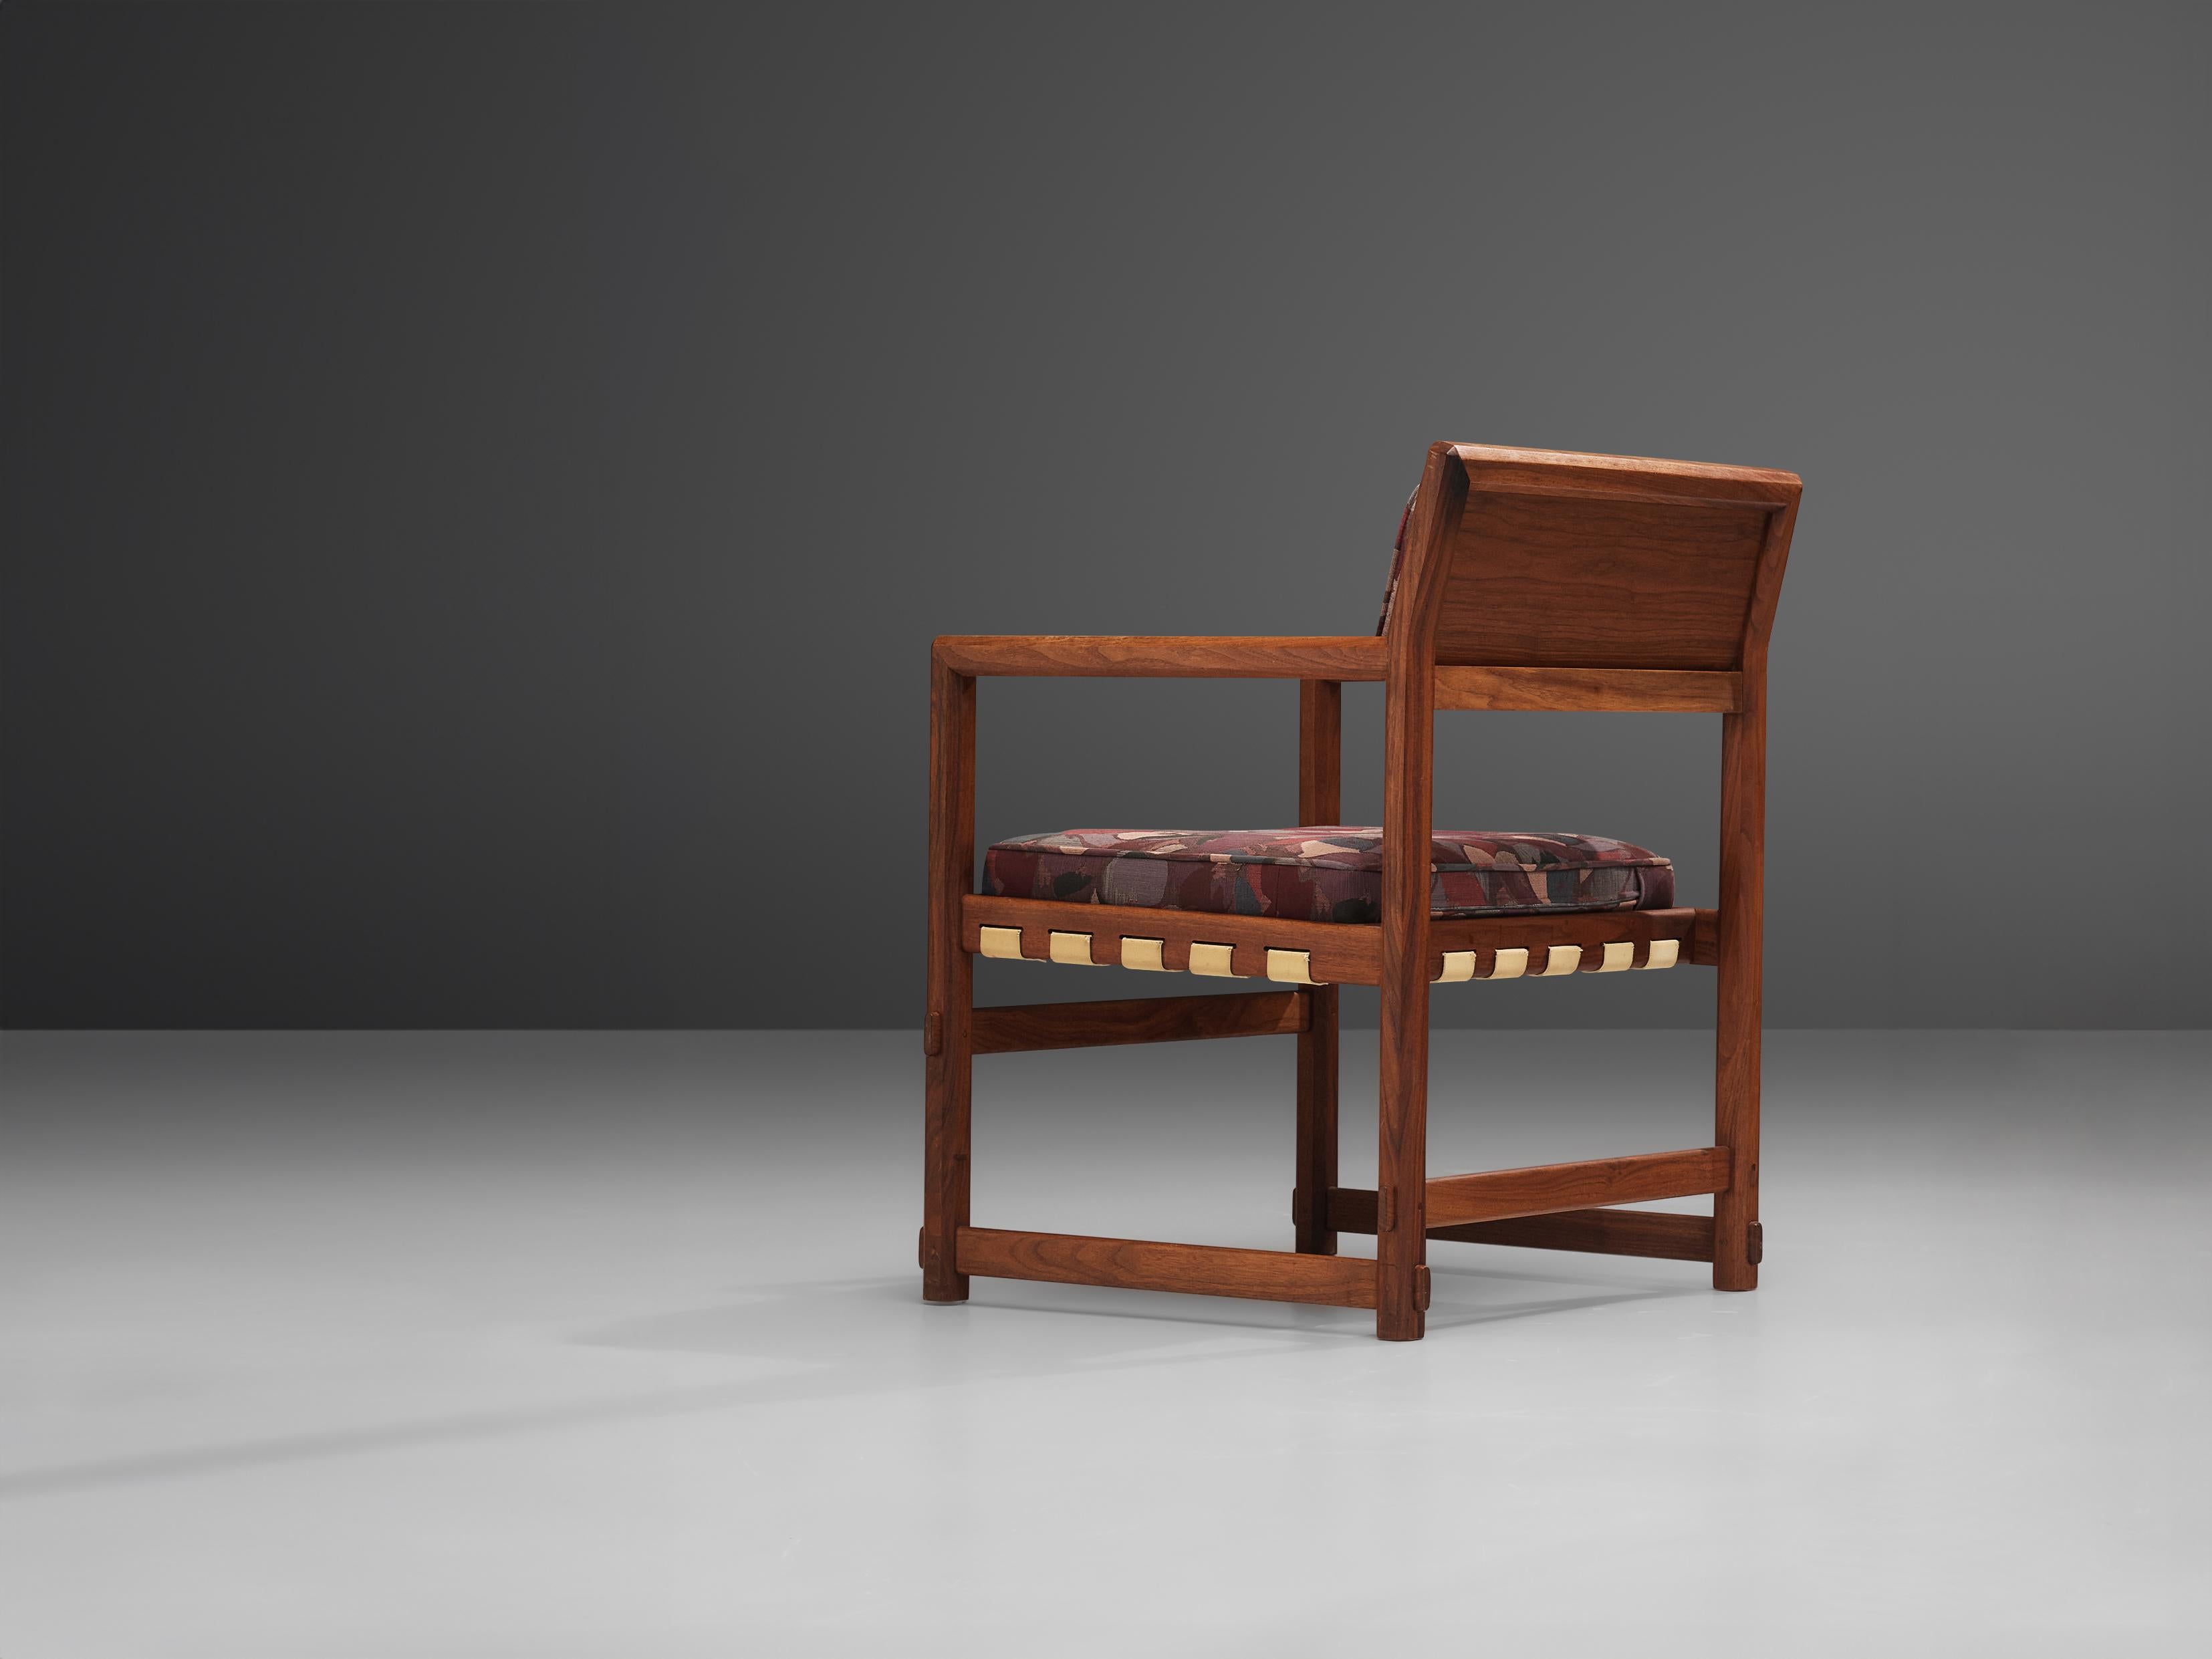 Edward Wormley for Dunbar by Mobilier Universel, armchair, model '5762', teak, fabric, Belgium, design 1957

This dining chair is designed by Edward Wormley for the furniture company Dunbar in 1957 and manufactured by Mobilier Universel. The